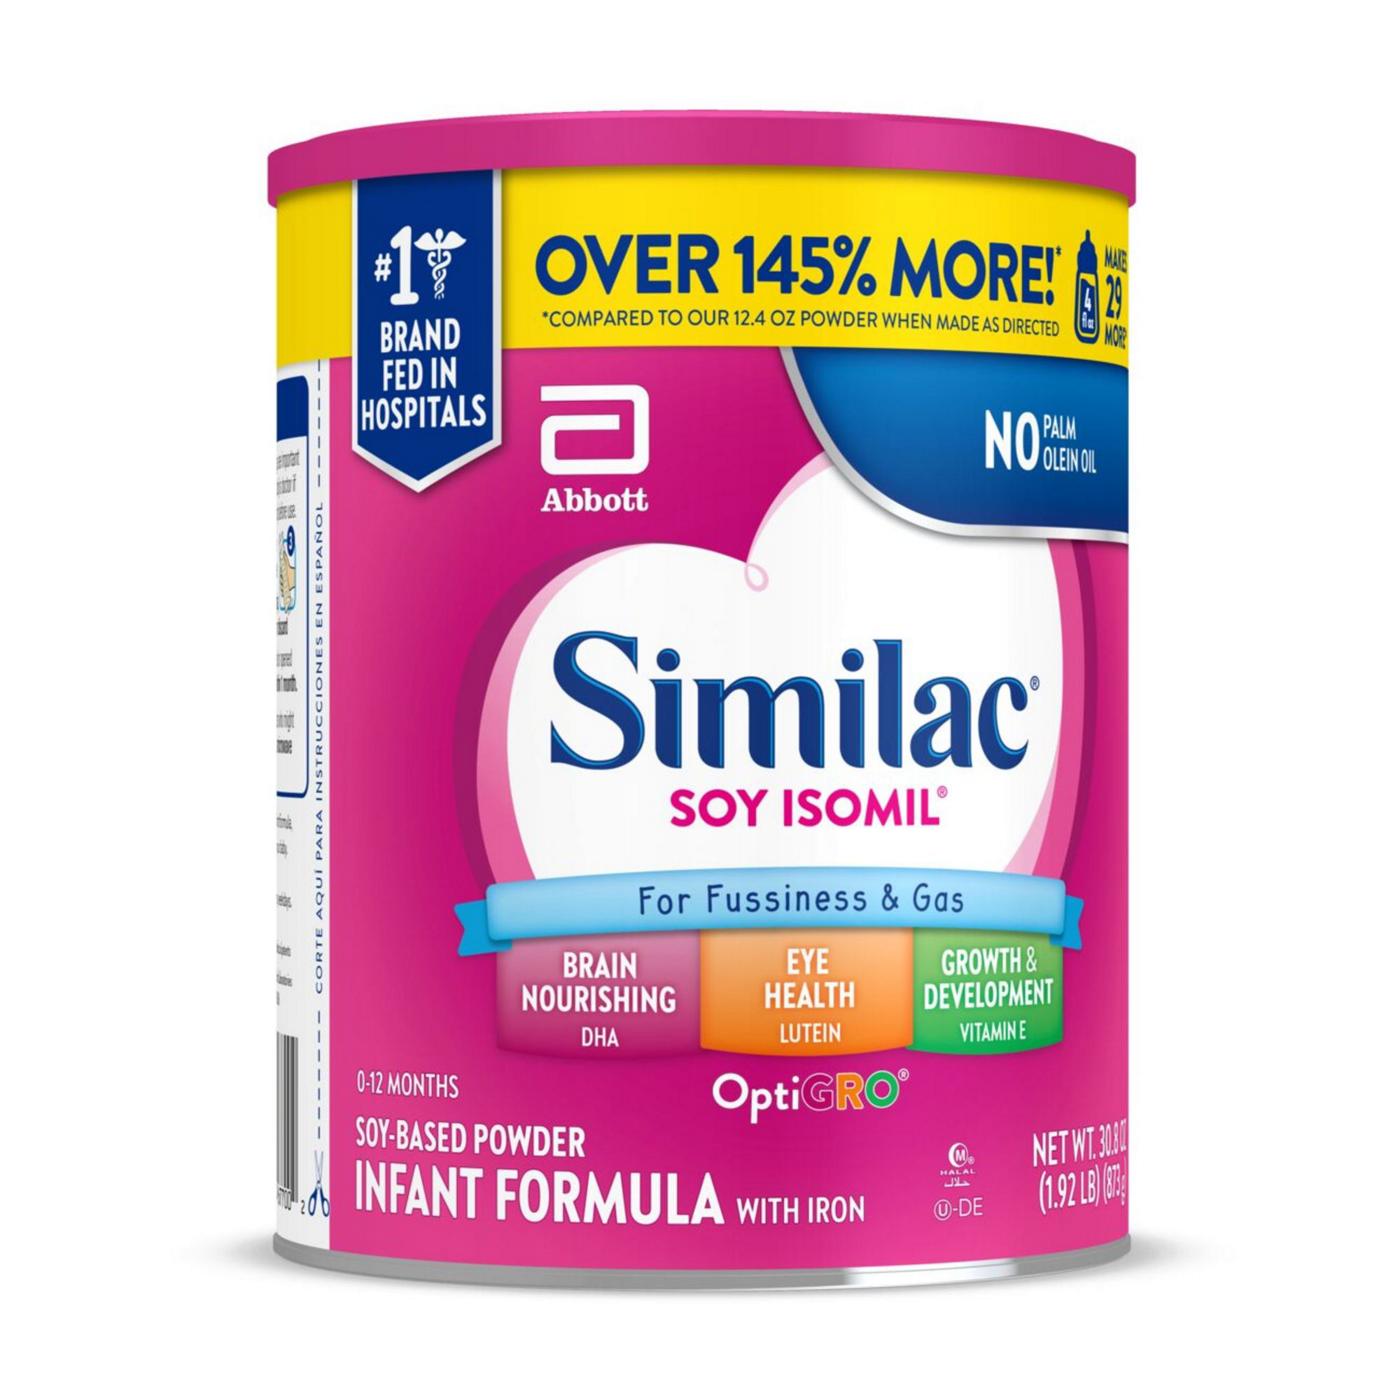 Similac Soy Isomil For Fussiness and Gas Infant Formula with Iron Powder; image 9 of 9